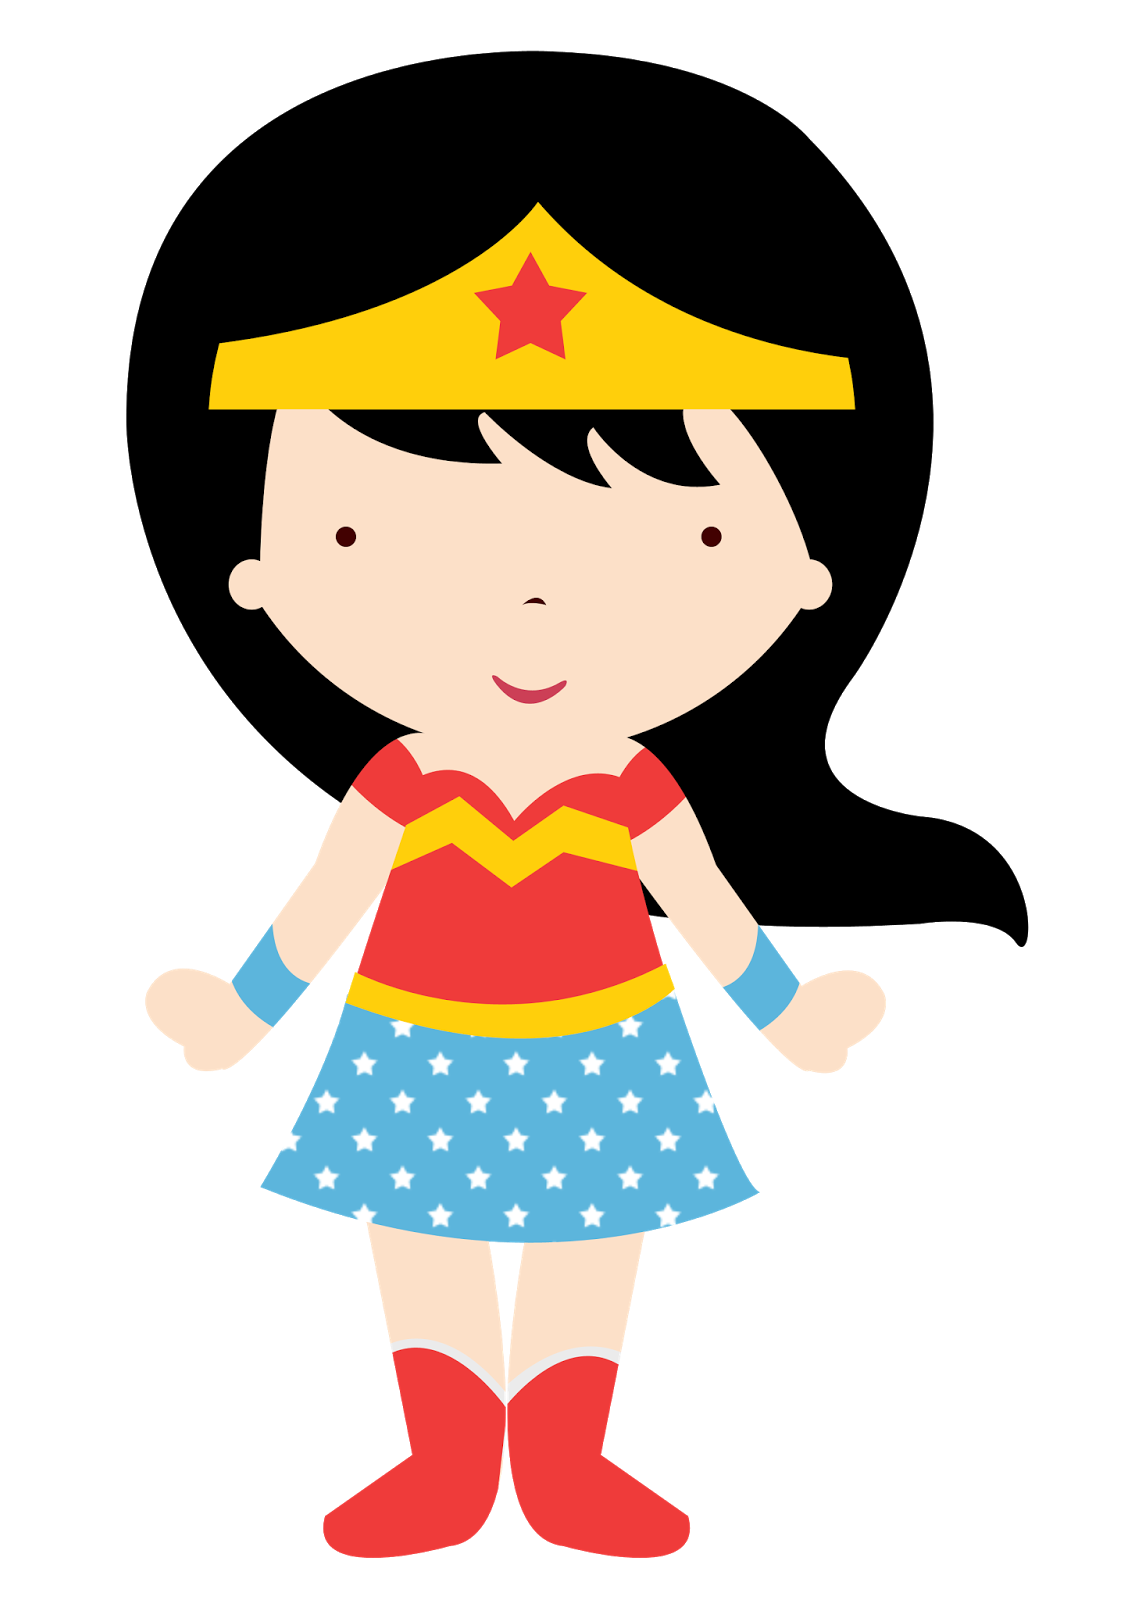 Baby in different styles. Lego clipart wonder woman